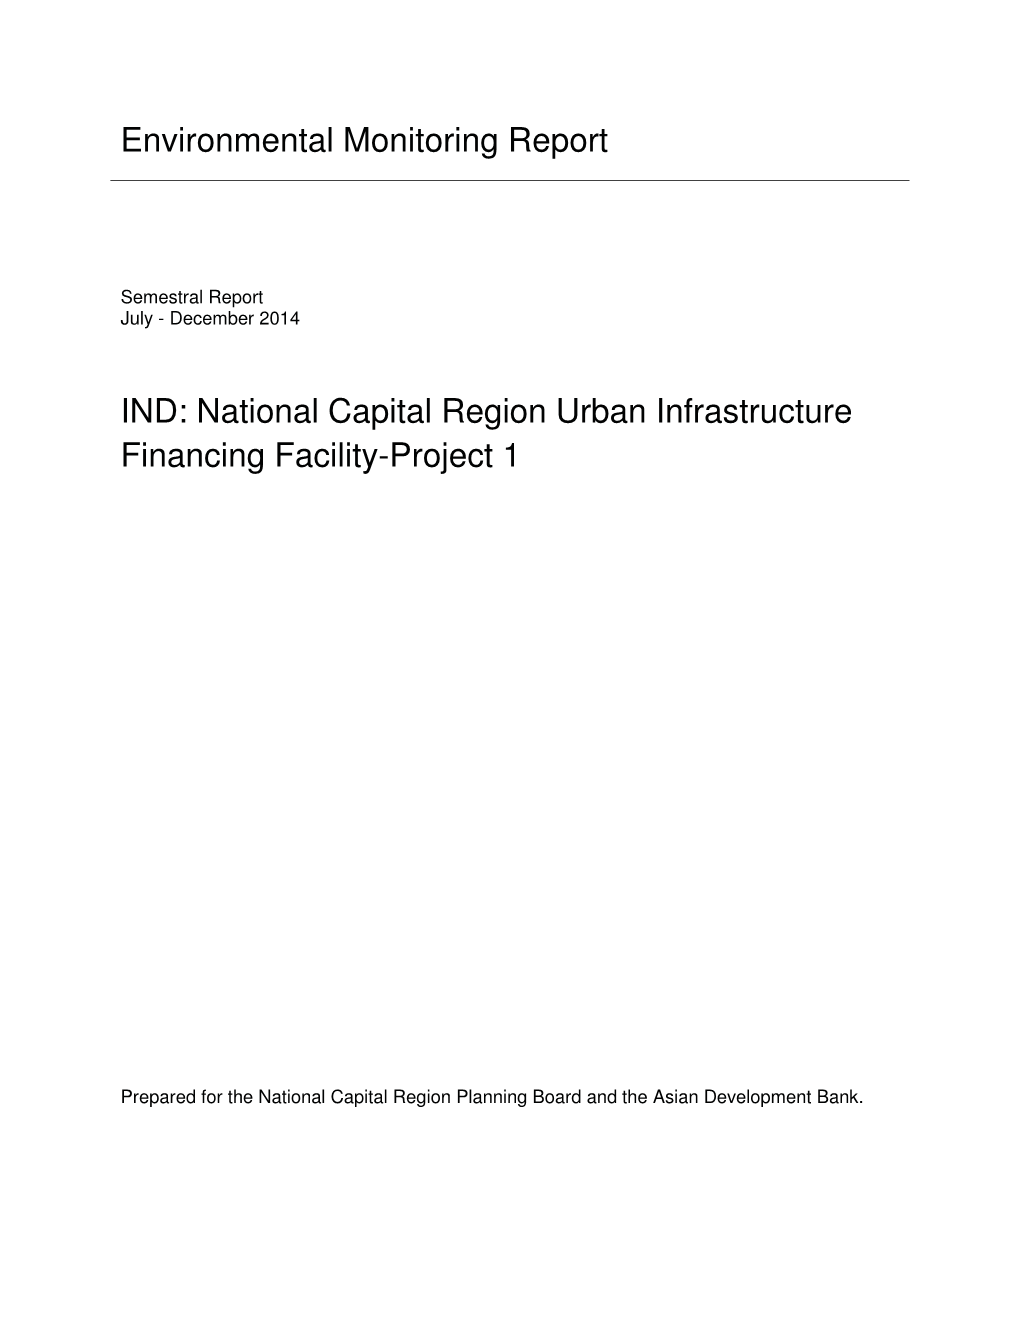 National Capital Region Urban Infrastructure Financing Facility-Project 1